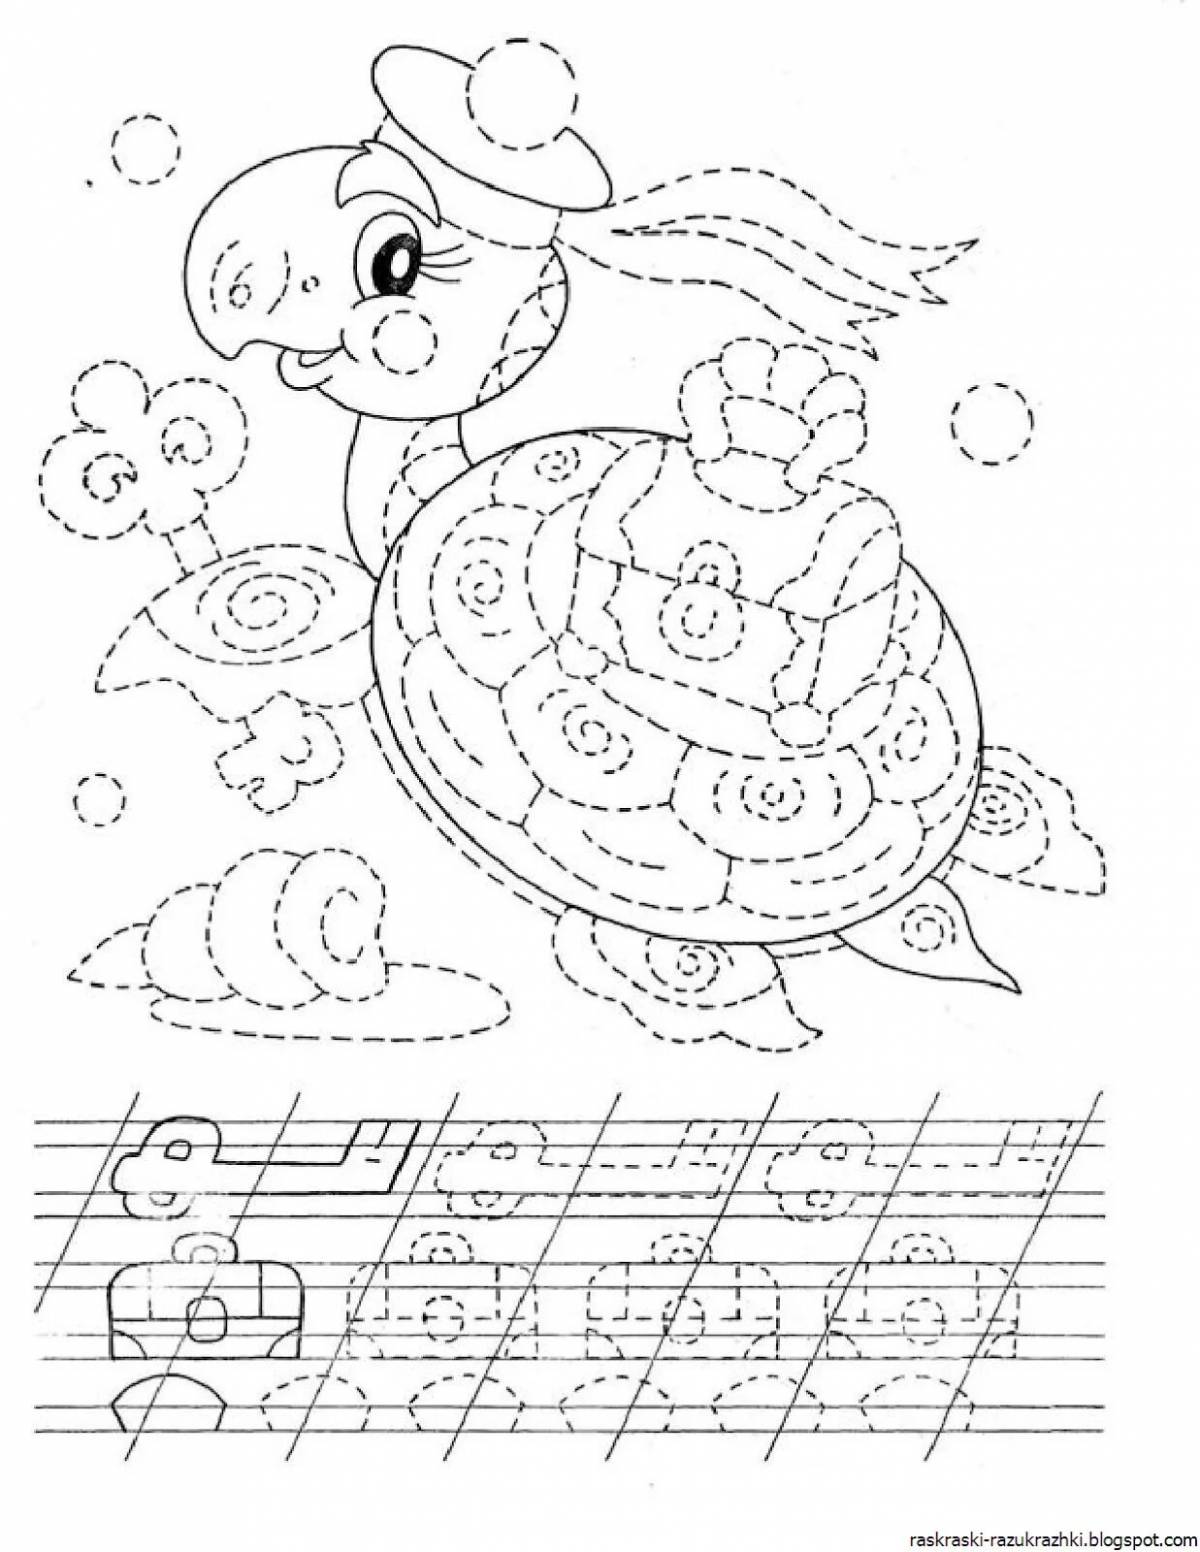 coloring-pages-copybook-for-children-5-6-years-old-letters-37-pcs